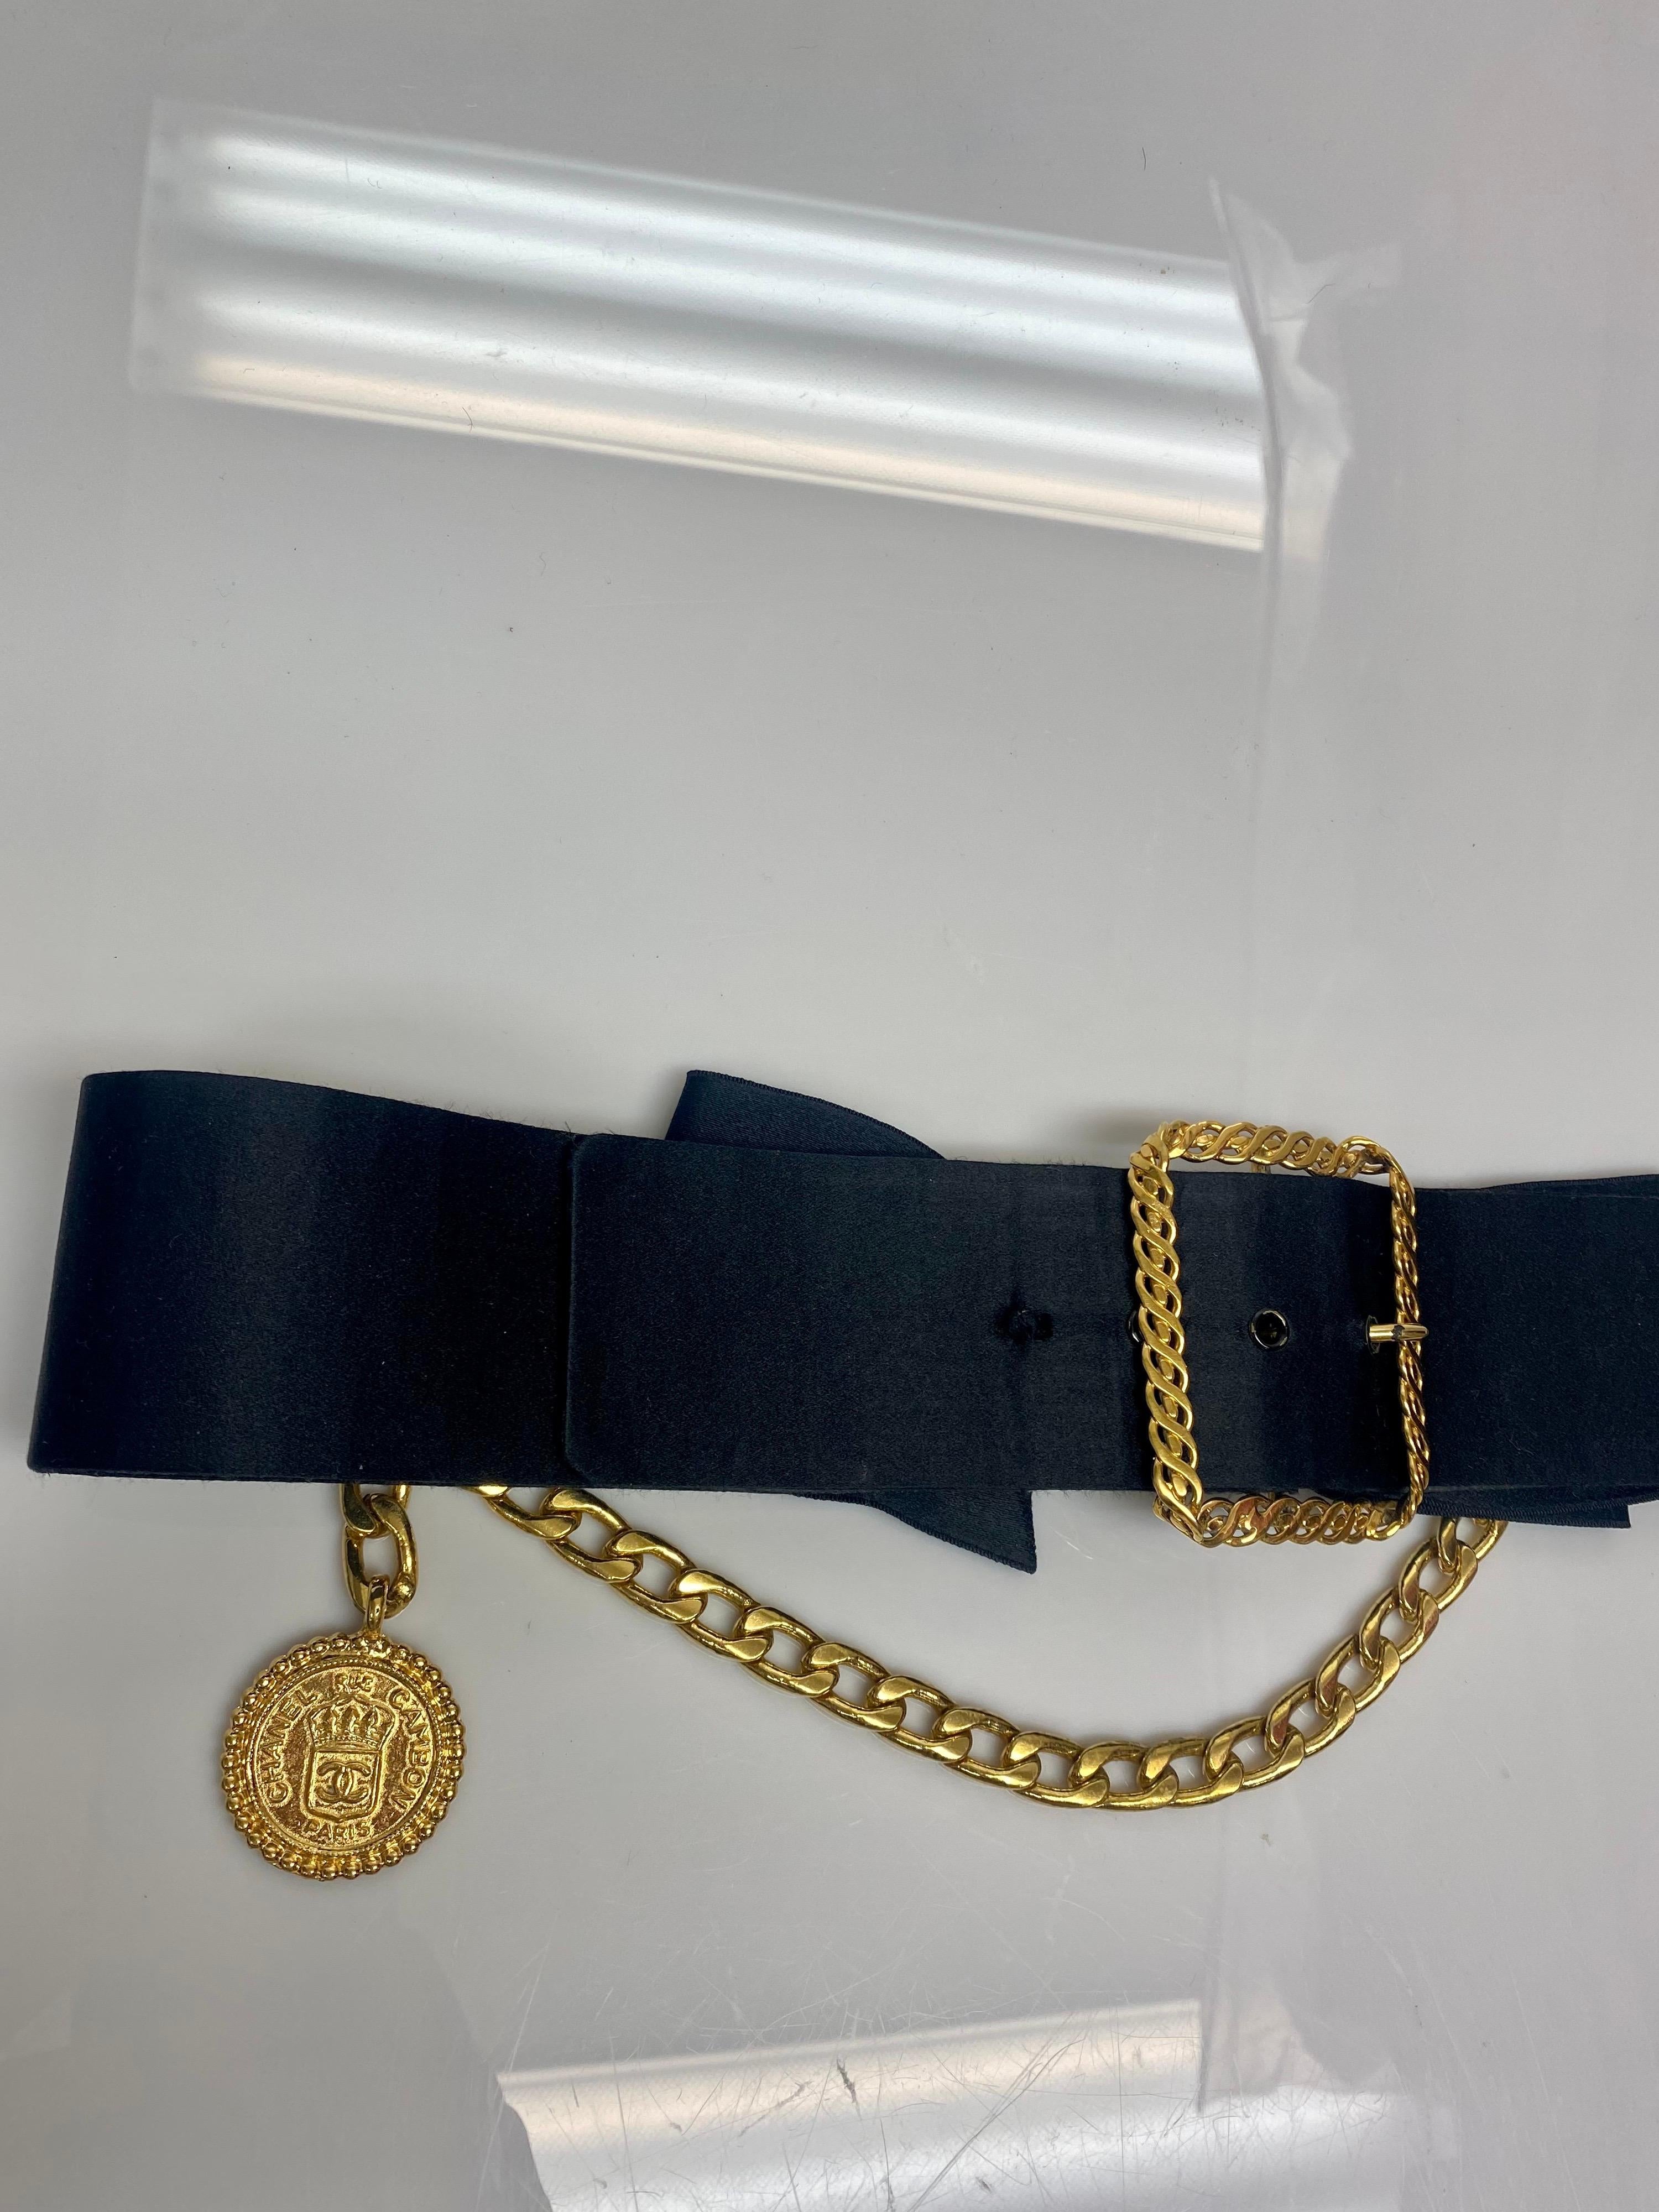 Chanel Vintage Black Satin Bow with Gold Buckle, Chain and Medalion Belt. This vintage Chanel belt is a luxury addition to any closet. The item features a black satin bow and a large gold hardware buckle with a gold hardware chain and medallion. Can